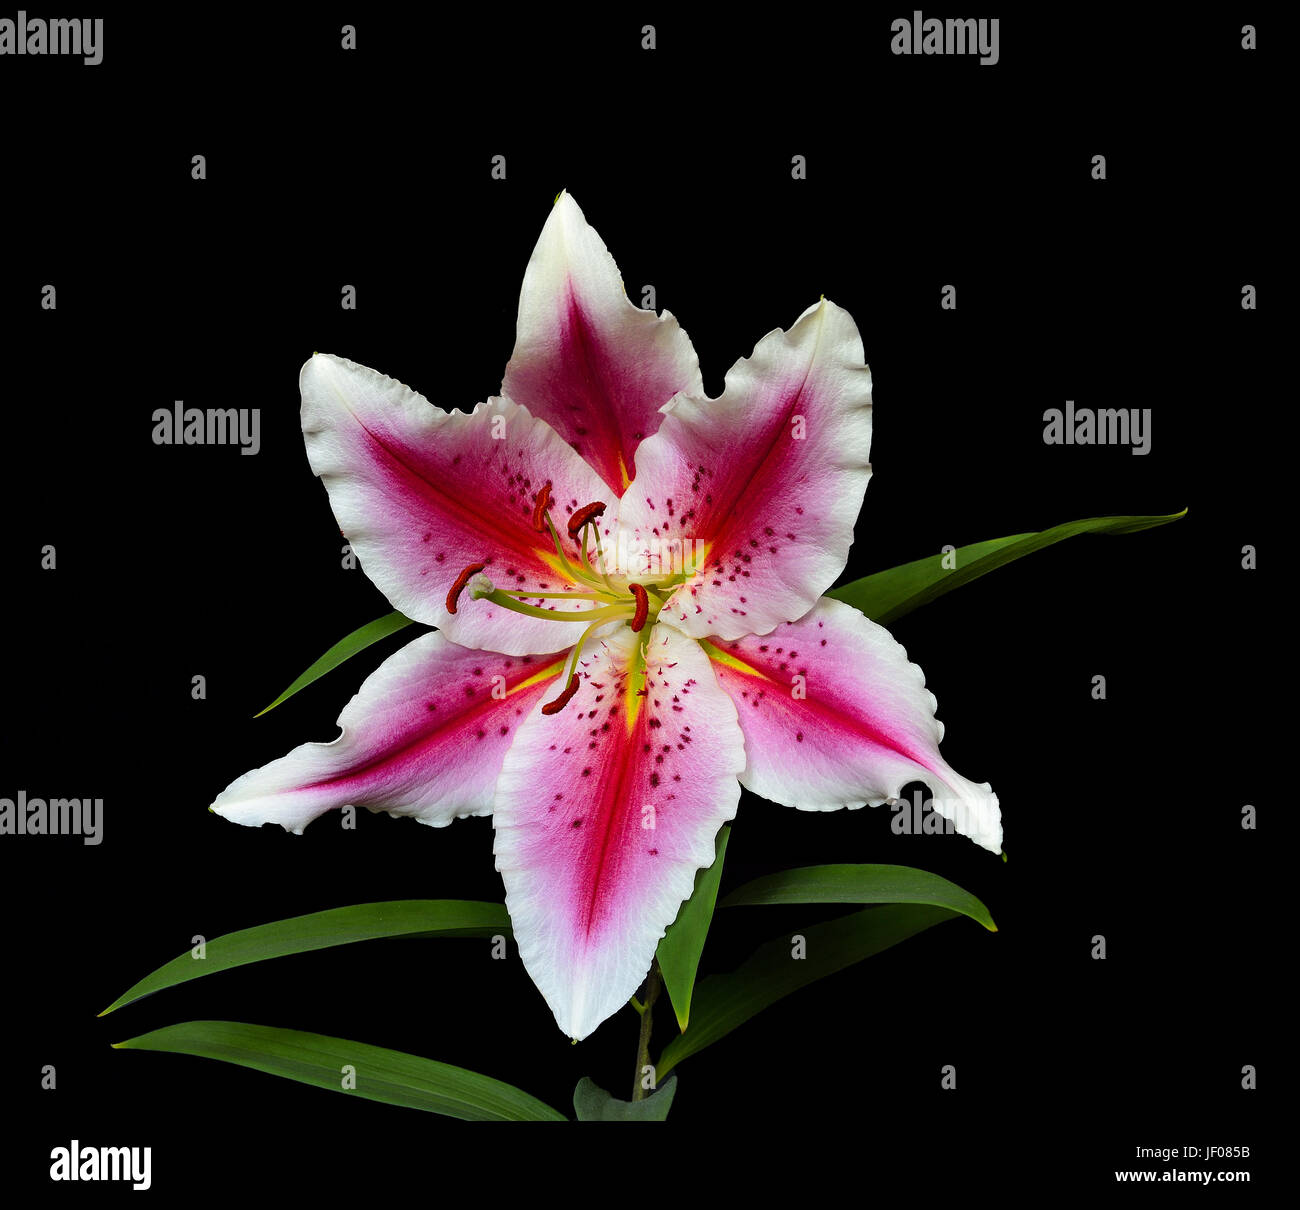 Elegant spotted pink lily isolated on black Stock Photo